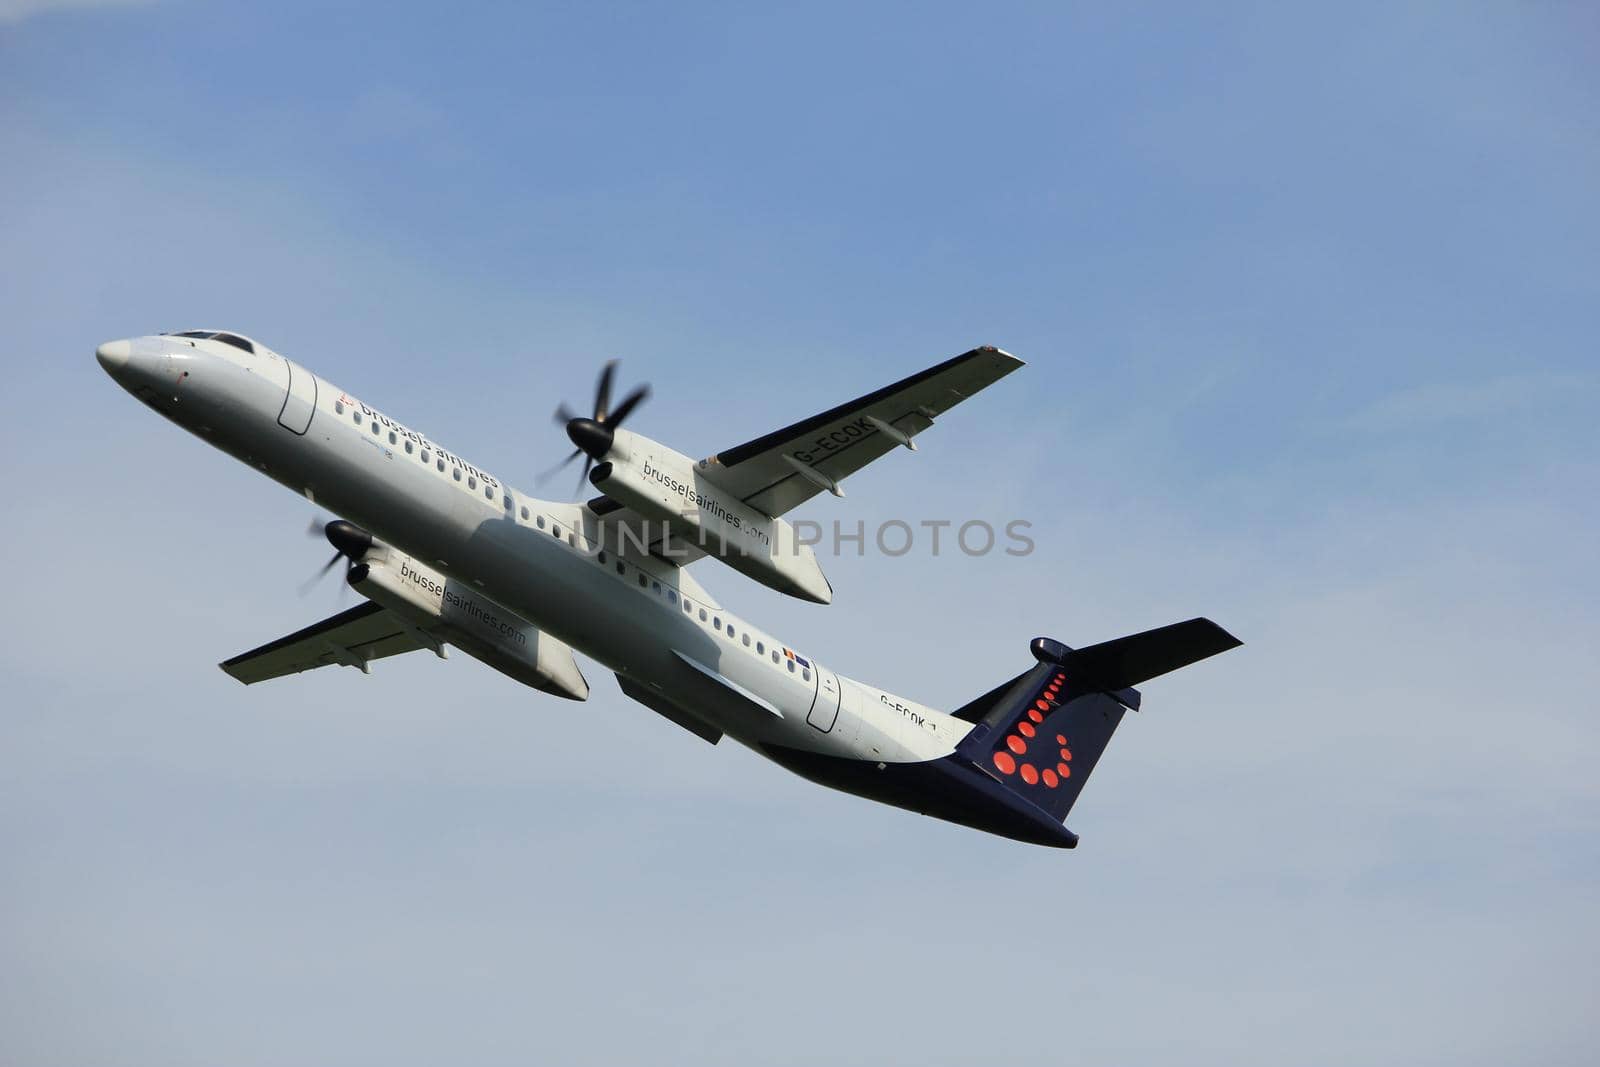 Amsterdam, the Netherlands  -  June 2nd, 2017: G-ECOK Brussels Airlines De Havilland Canada DHC-8 taking off from Polderbaan Runway Amsterdam Airport Schiphol